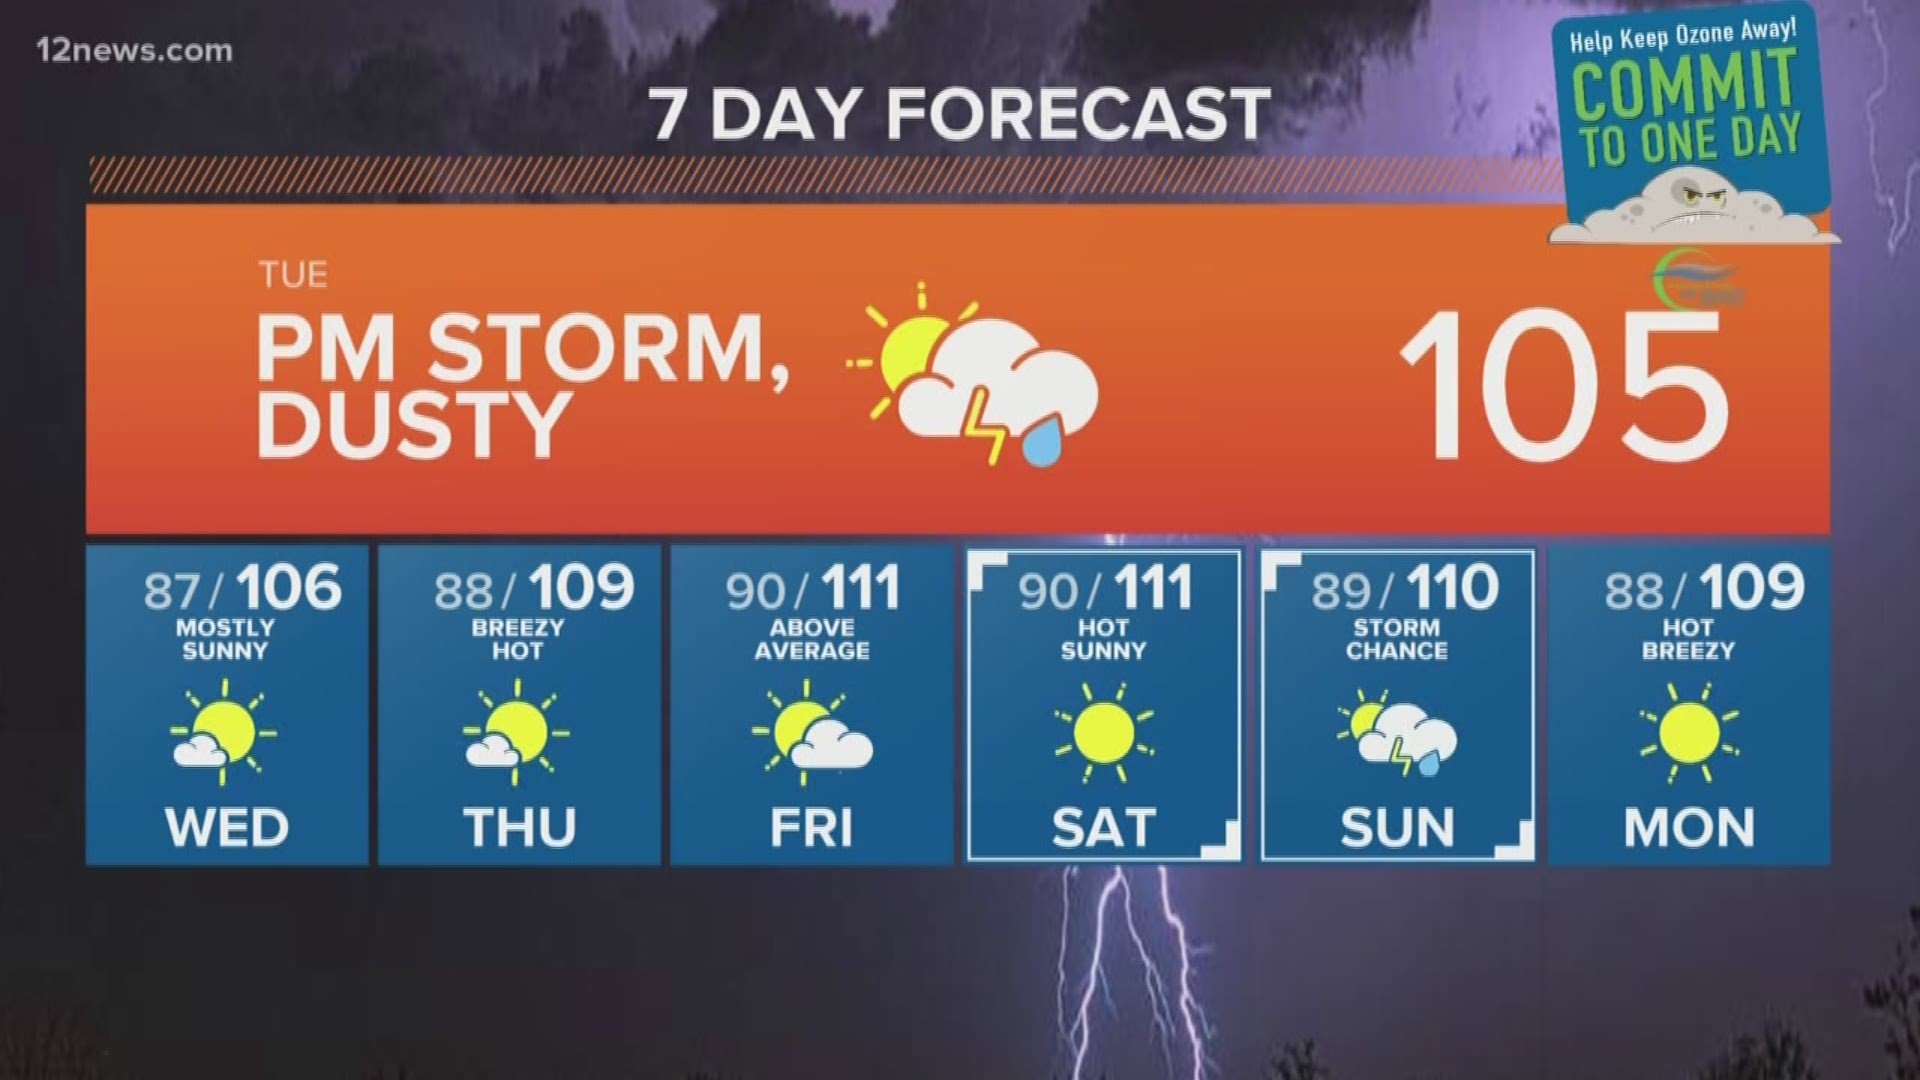 The main storm threats include a dust storm, damaging winds, lightning and rain in some spots.